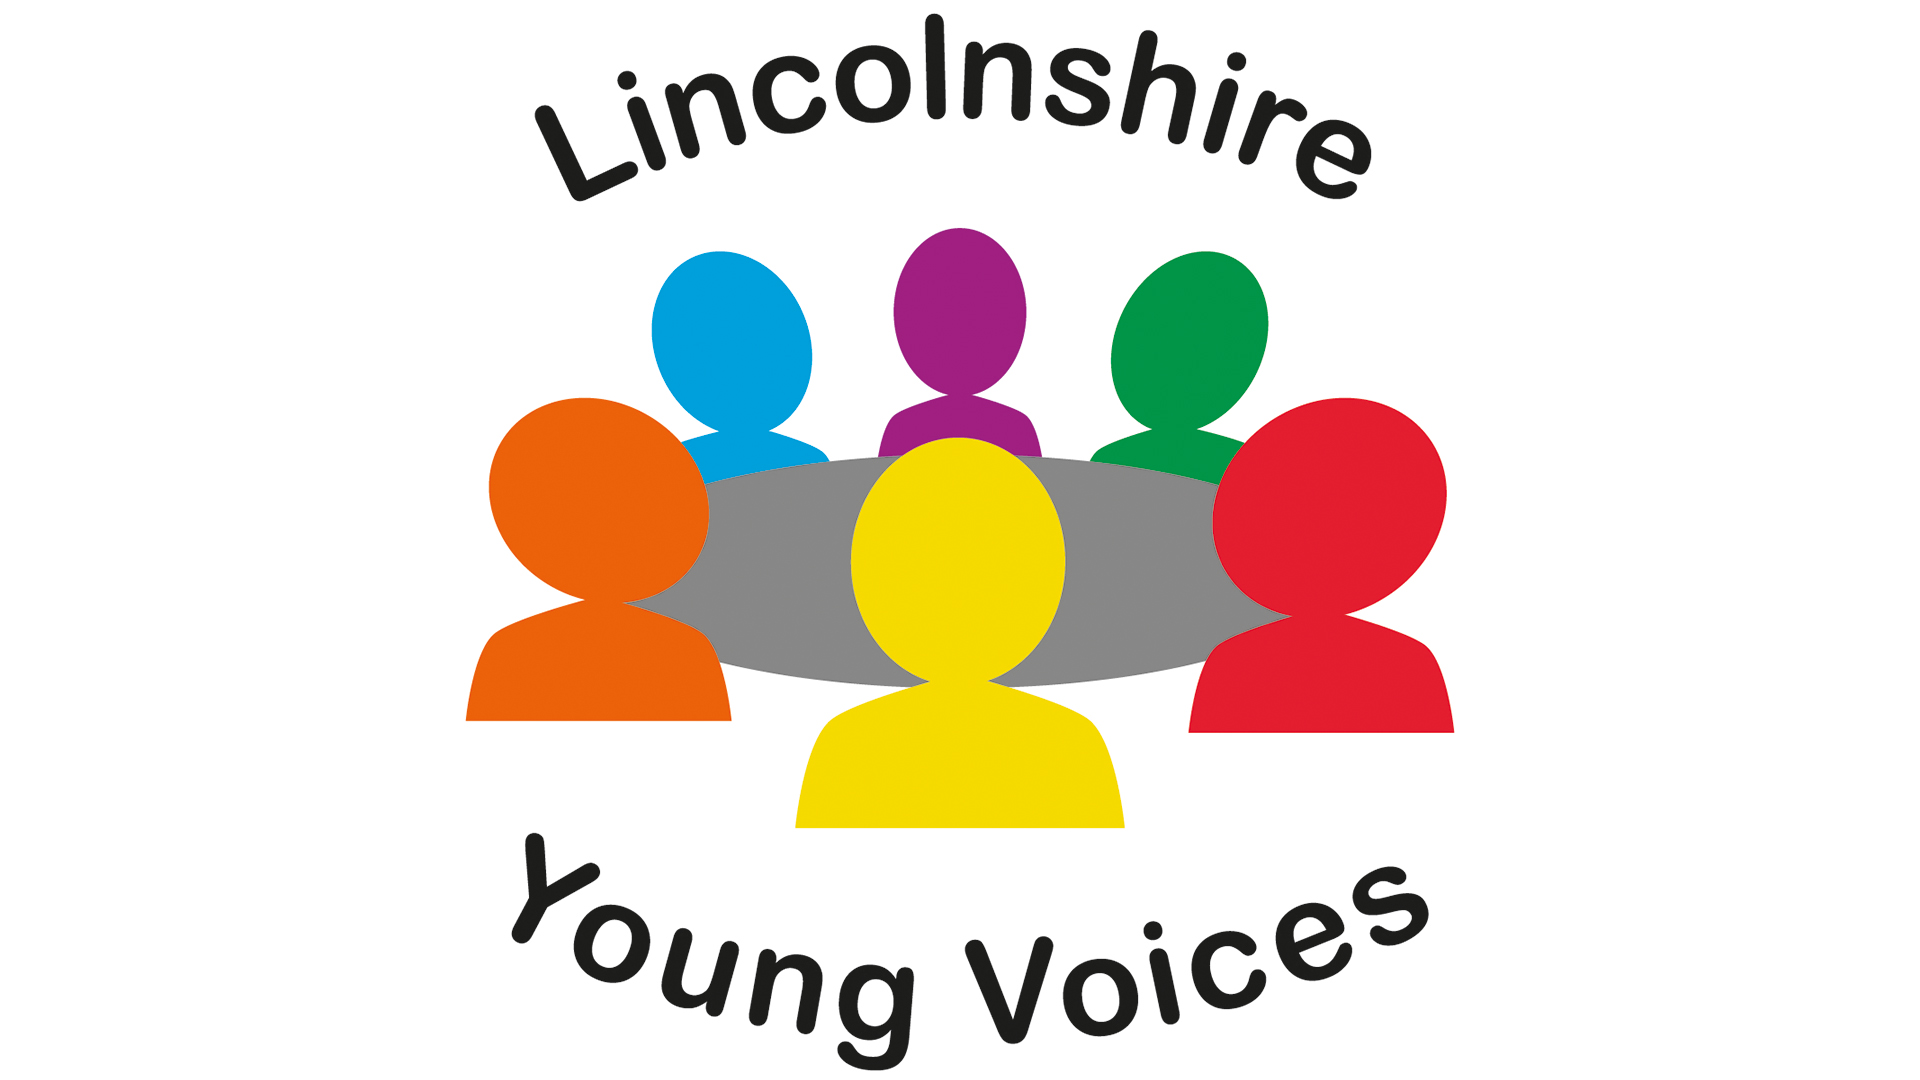 Lincolnshire Young Voices